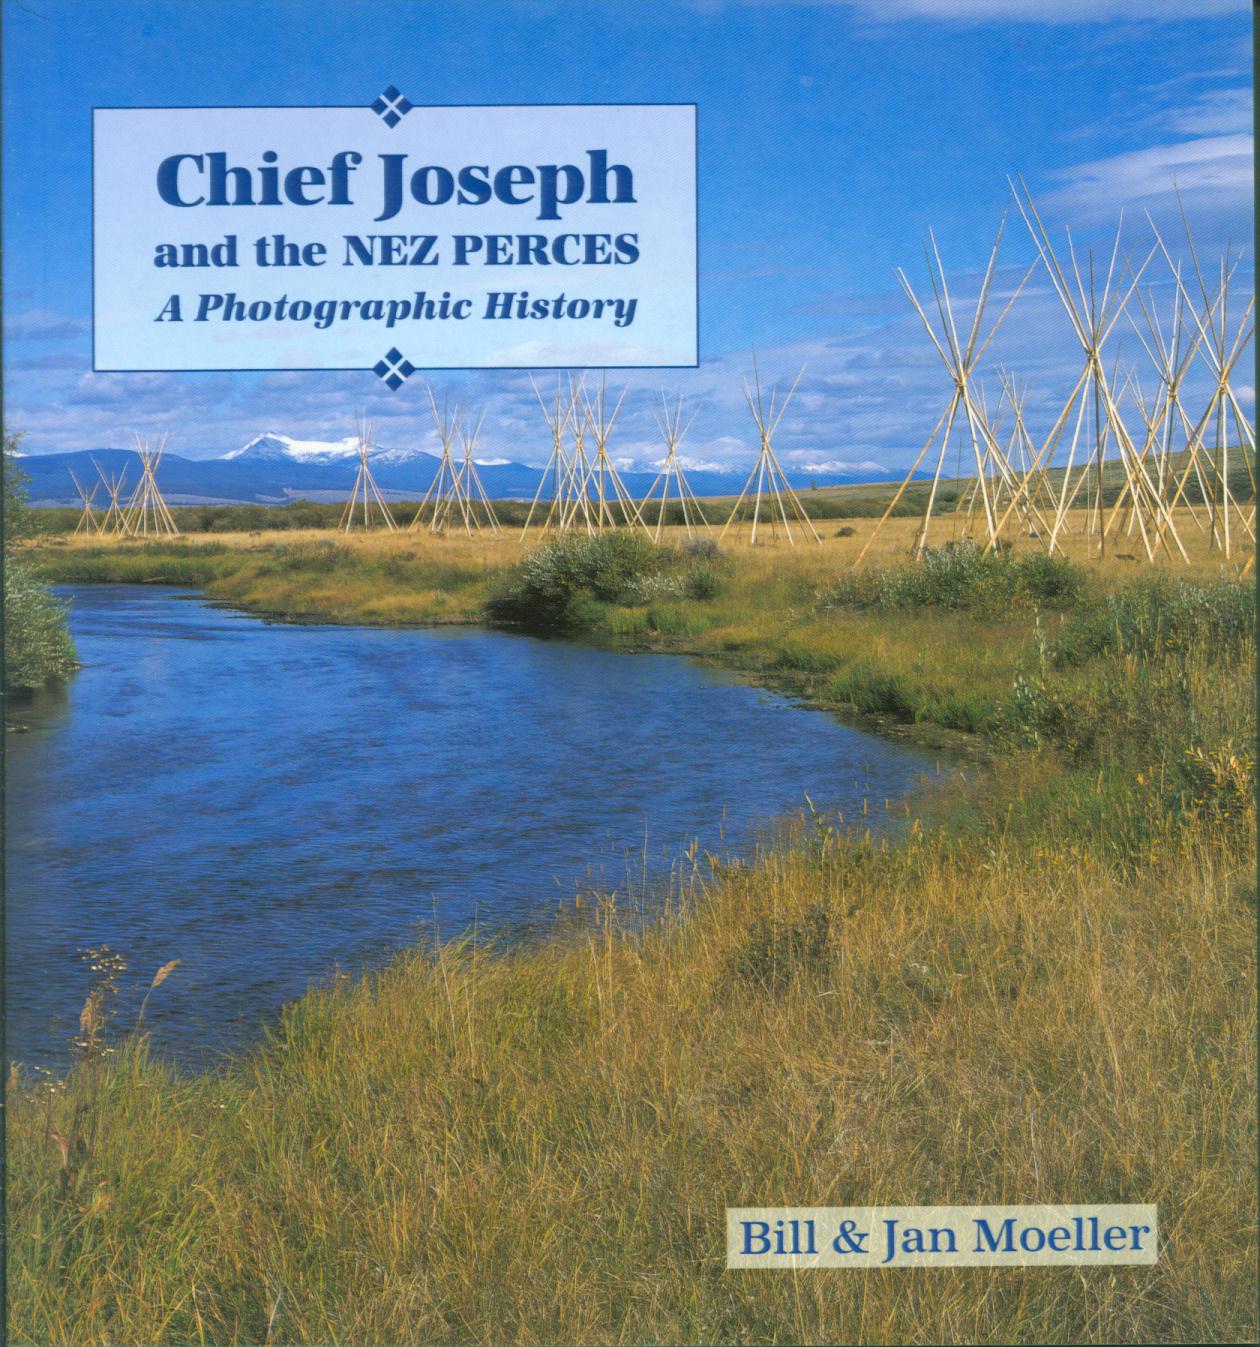 CHIEF JOSEPH AND THE NEZ PERCES: a photographic history.